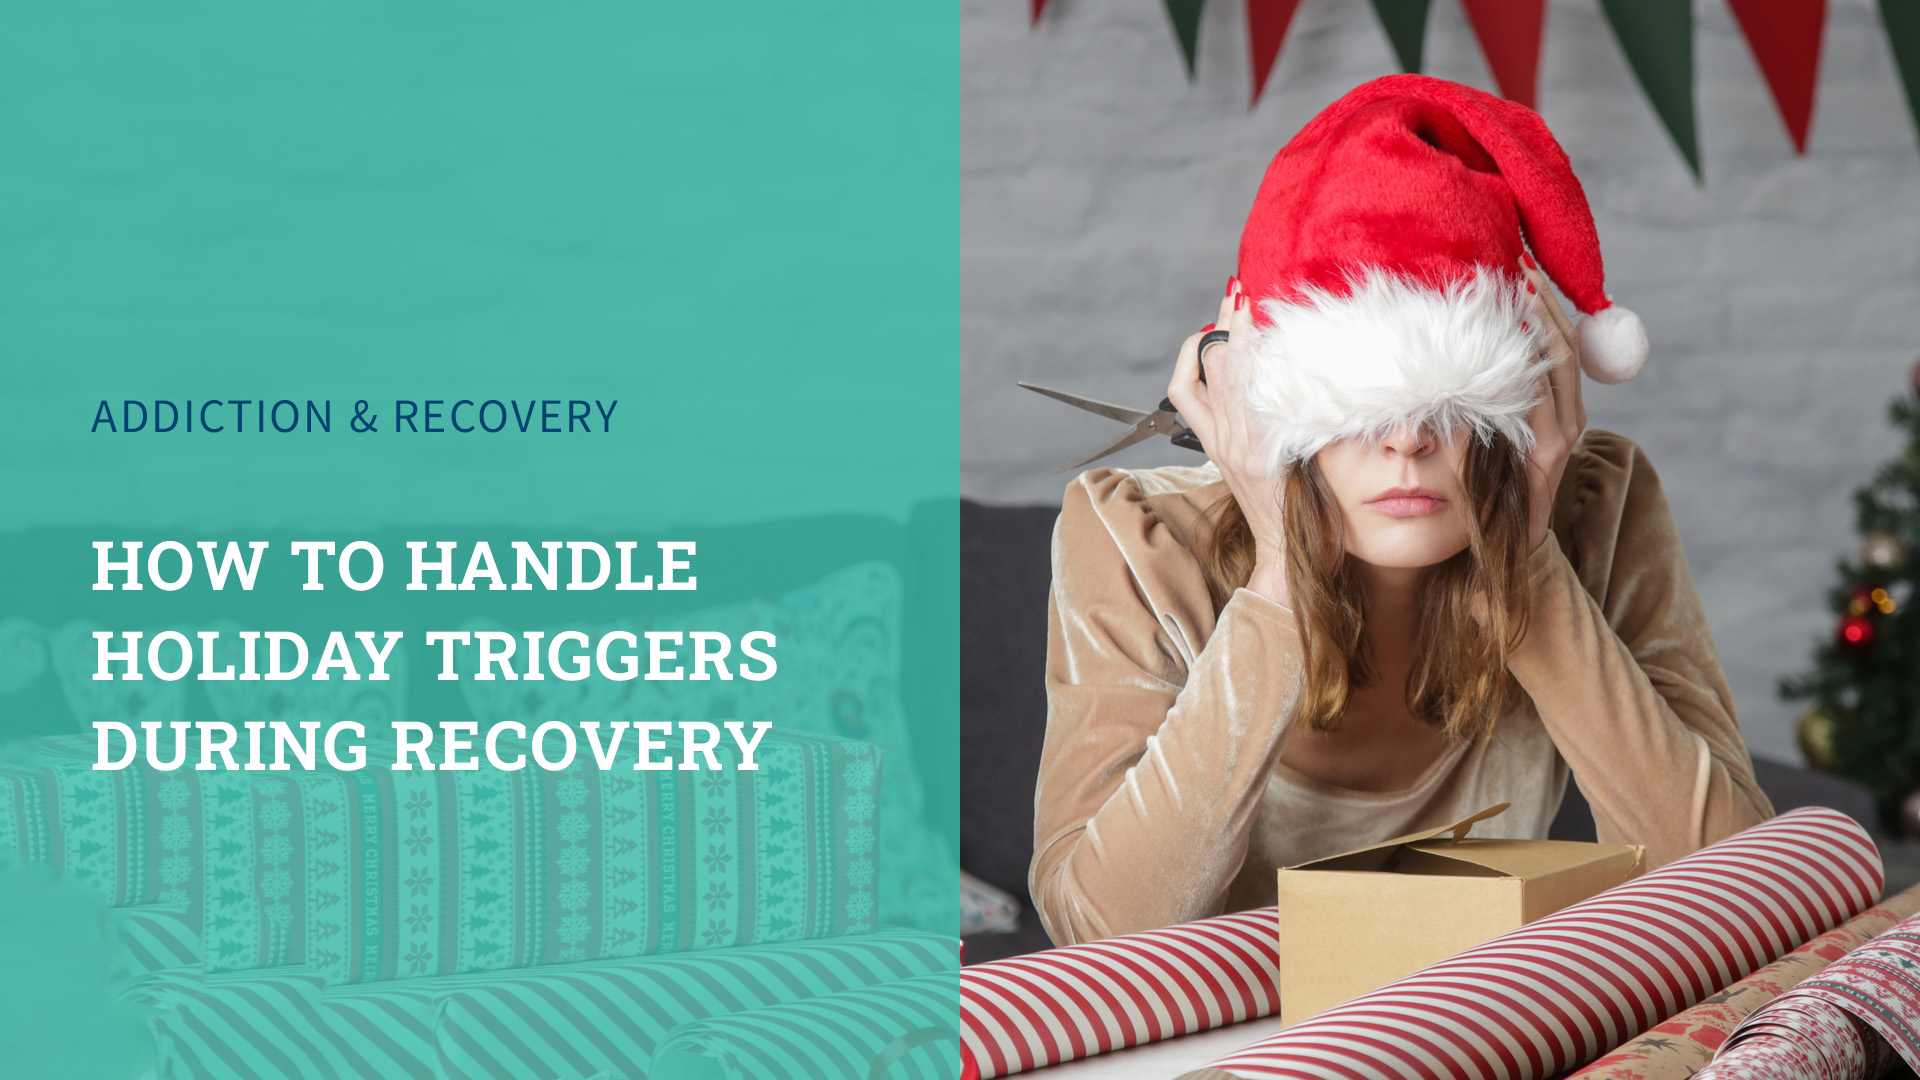 How to Handle Holiday Triggers During Recovery